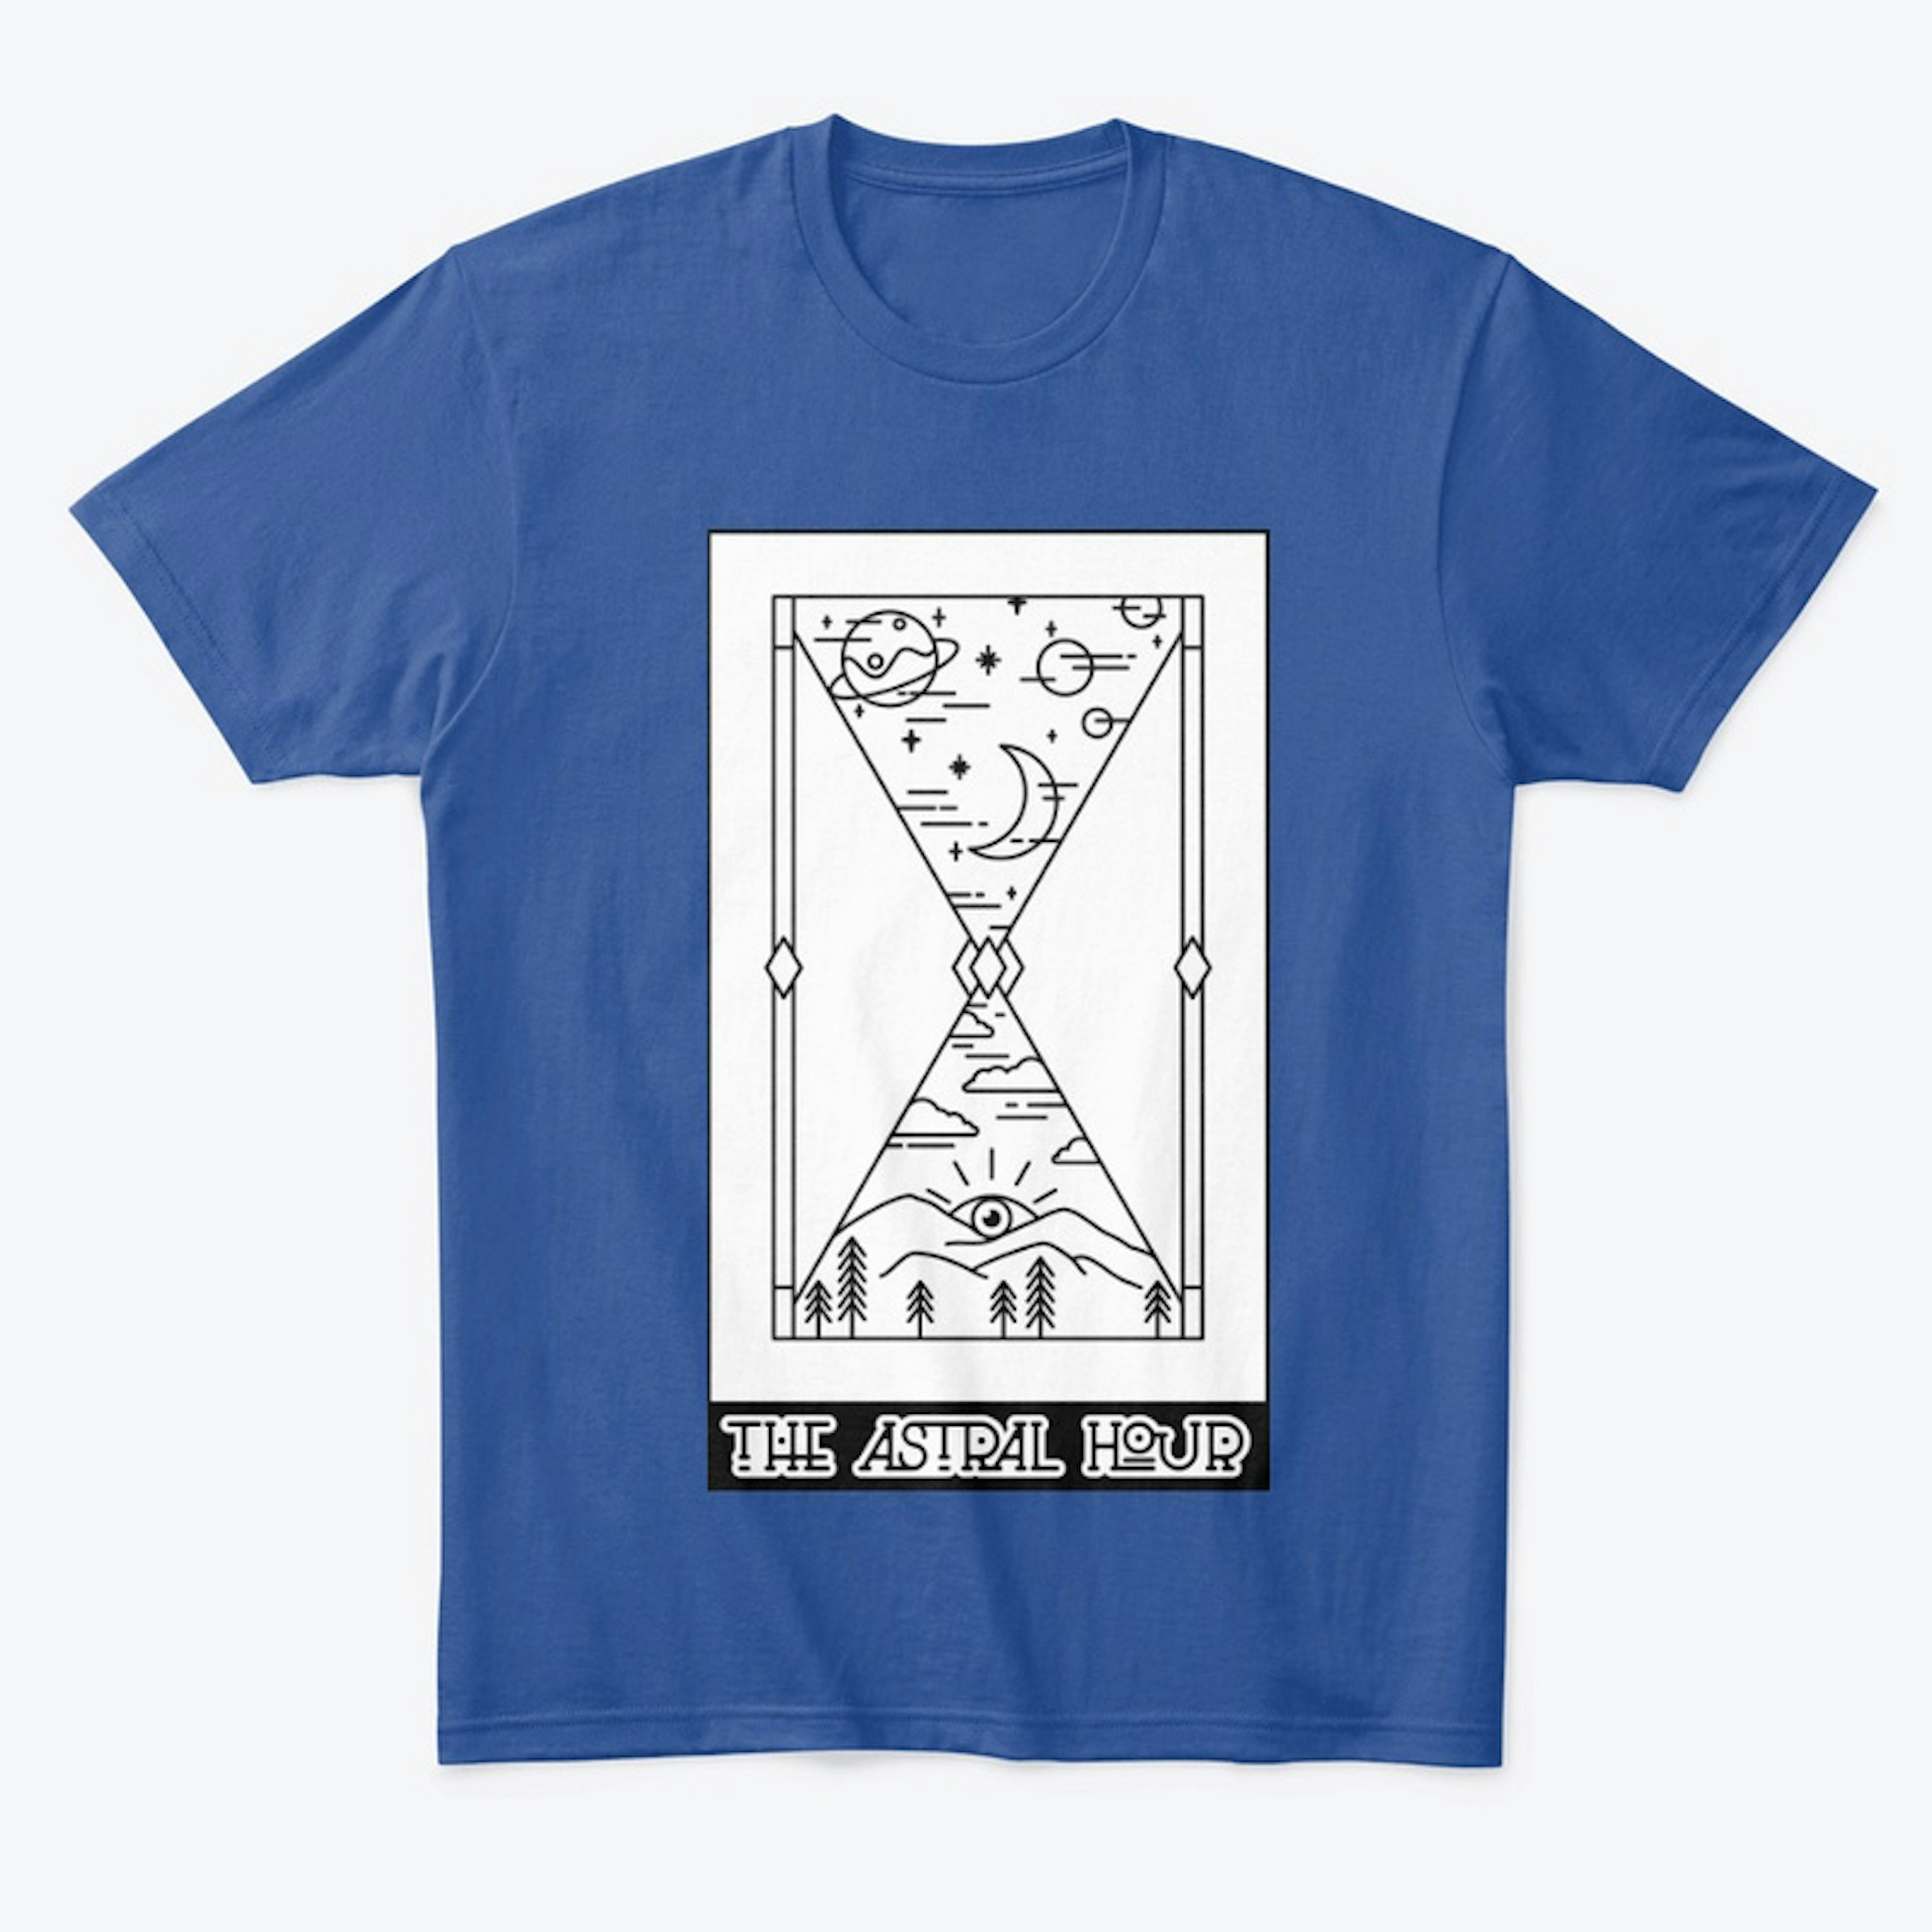 The Astral Hour Collection